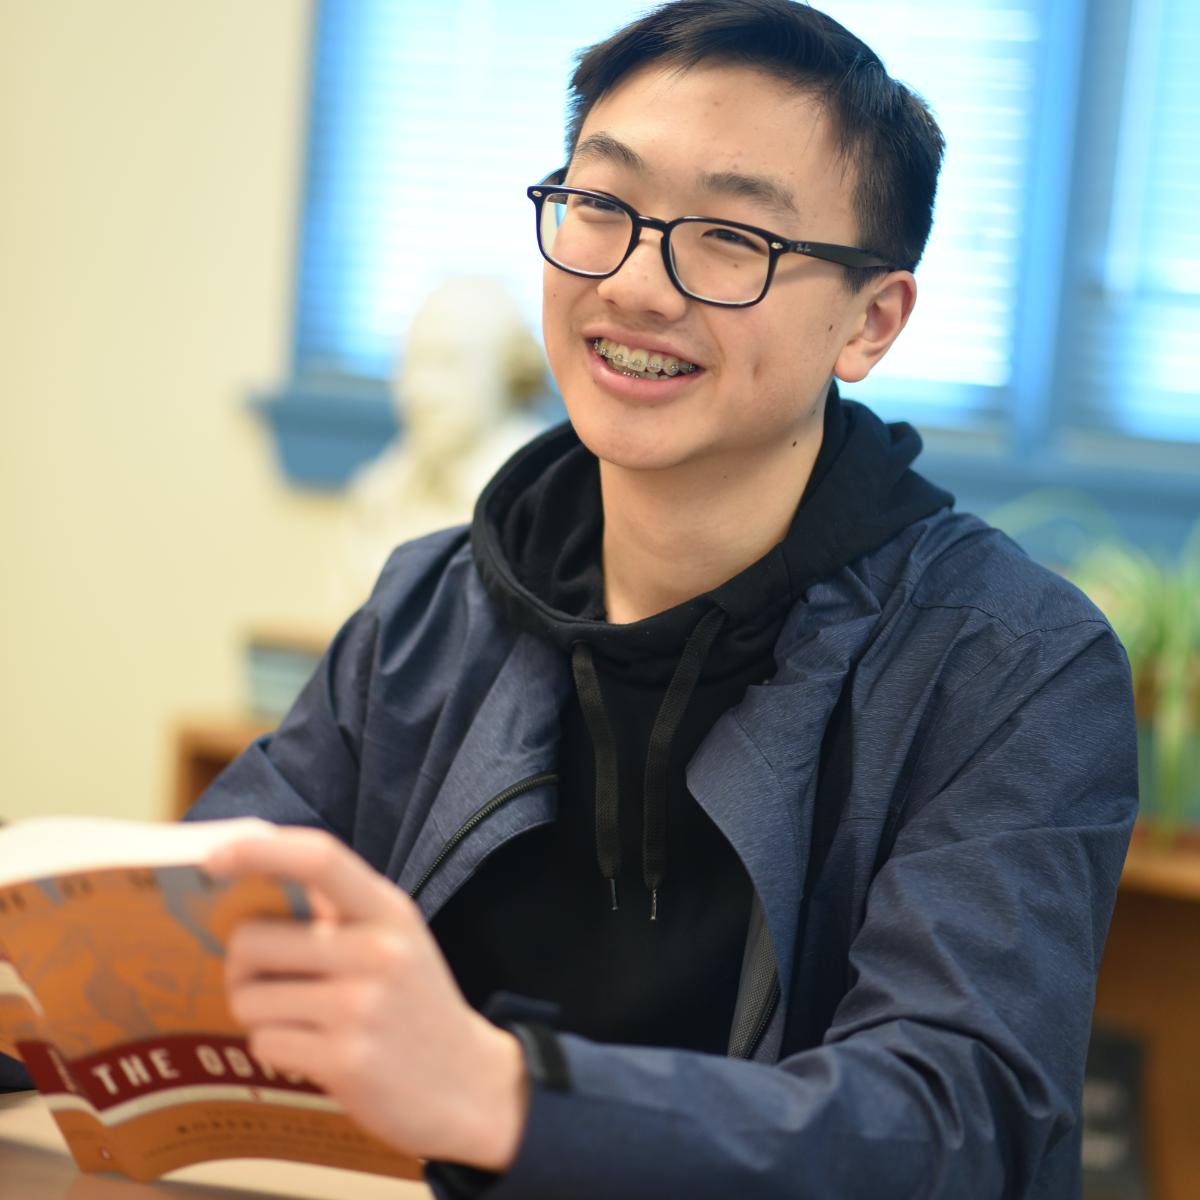 Student smiling with book